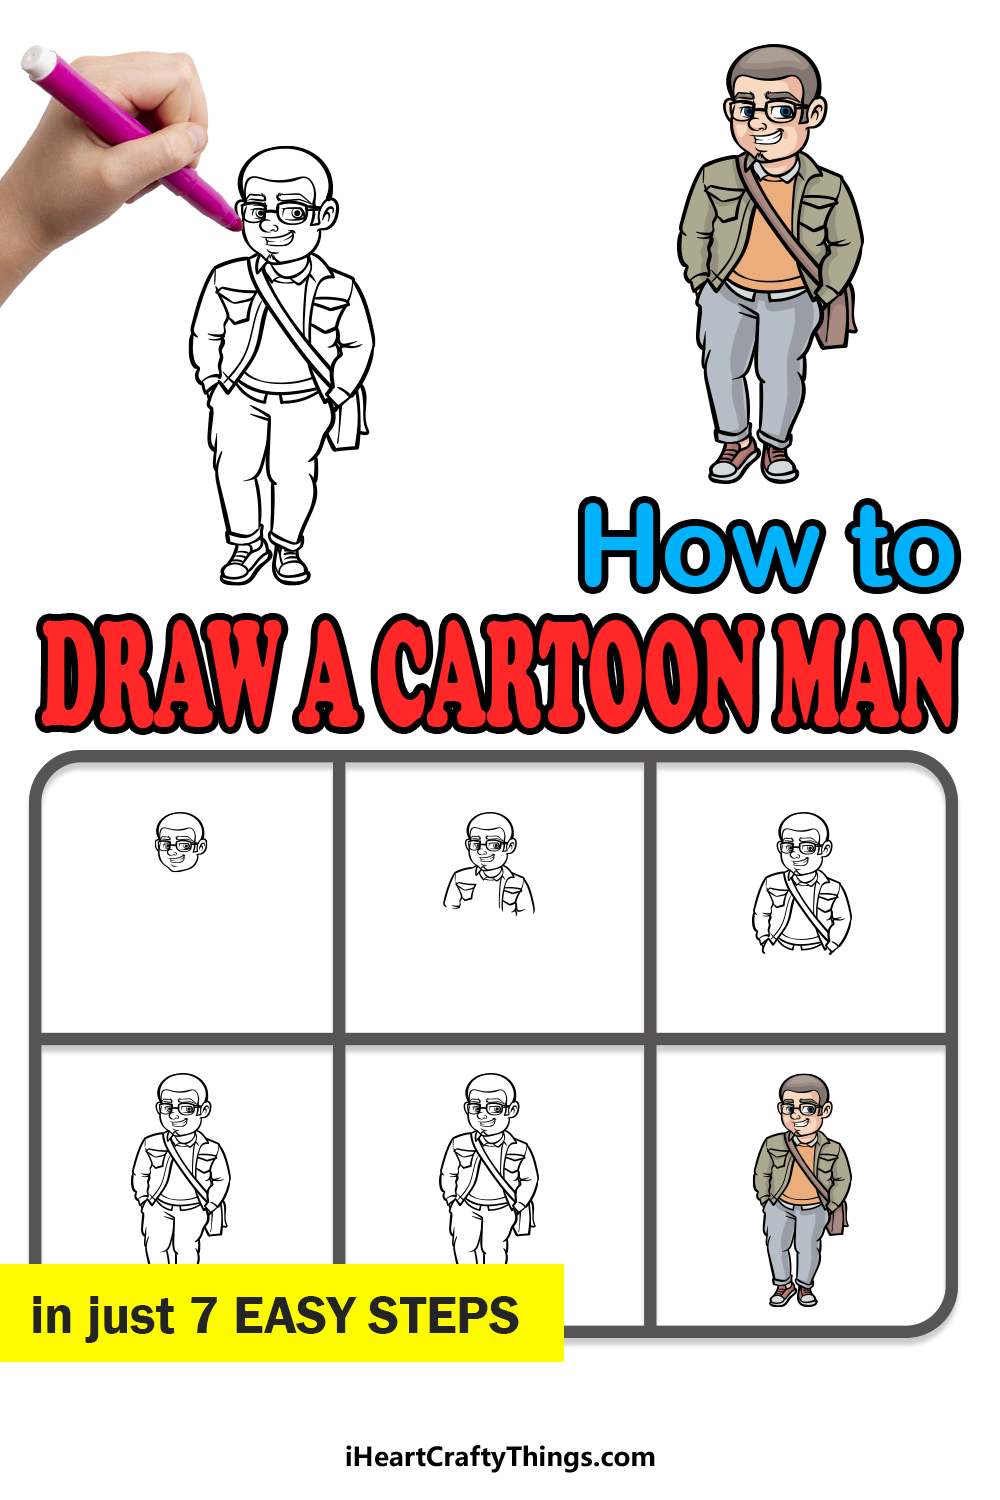 how to draw a cartoon man in 7 easy steps